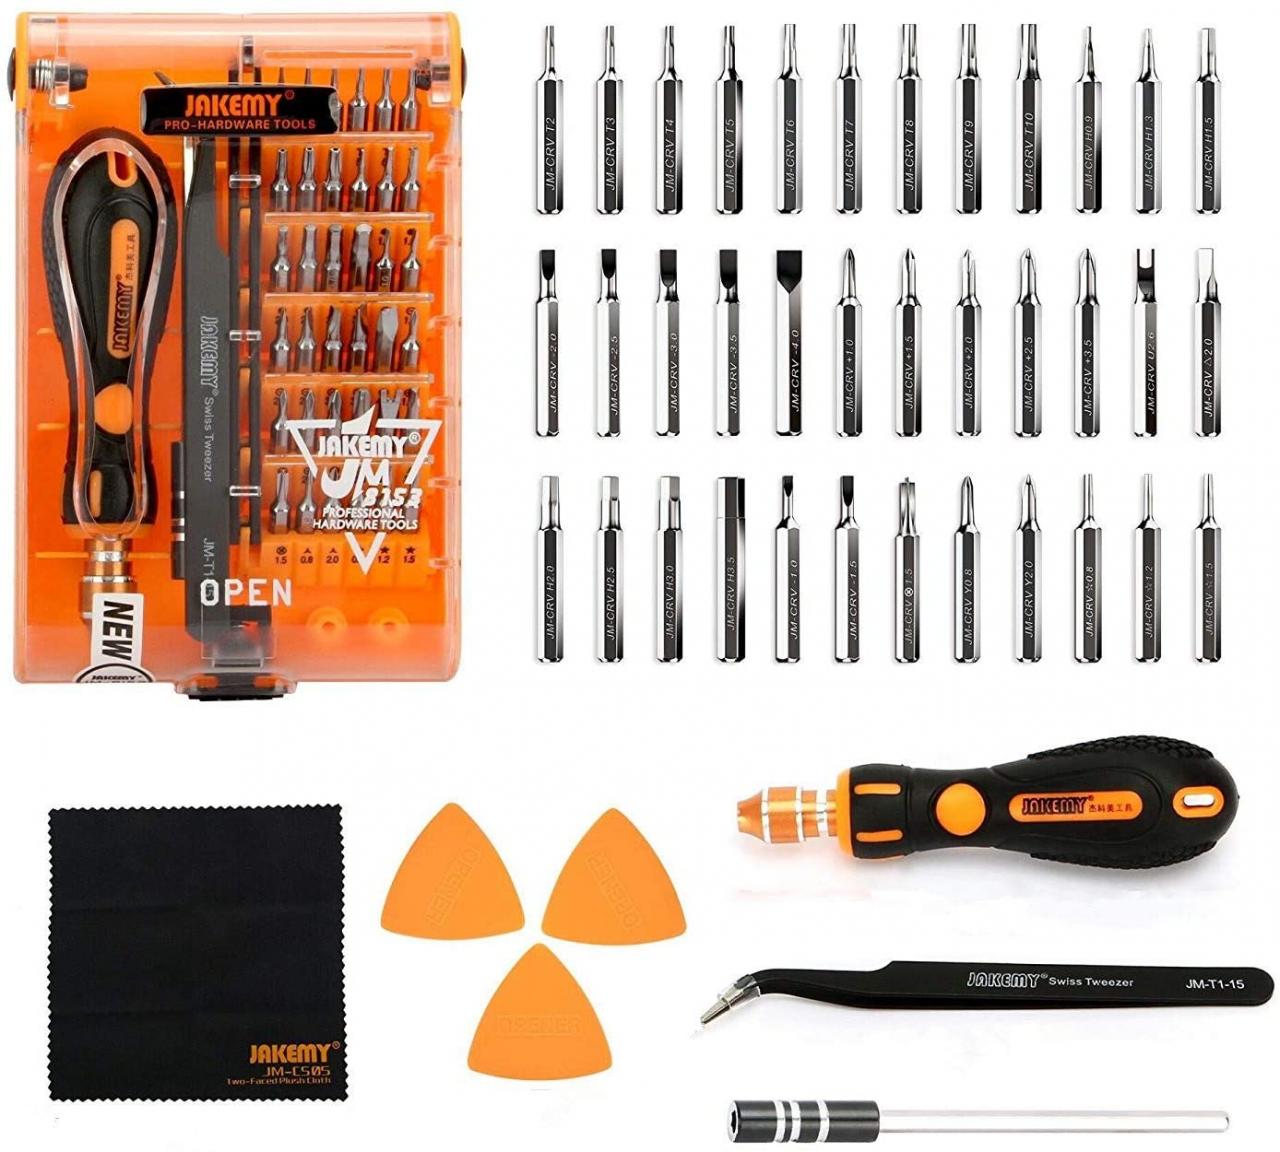 JAKEMY Home Rotatable Ratchet Screwdriver Set, 69 In 1 Household Repair  Toolkit, Disassemble Magnetic Kit For Furniture/Car/Computer/Electronics -  Bing - Shopping